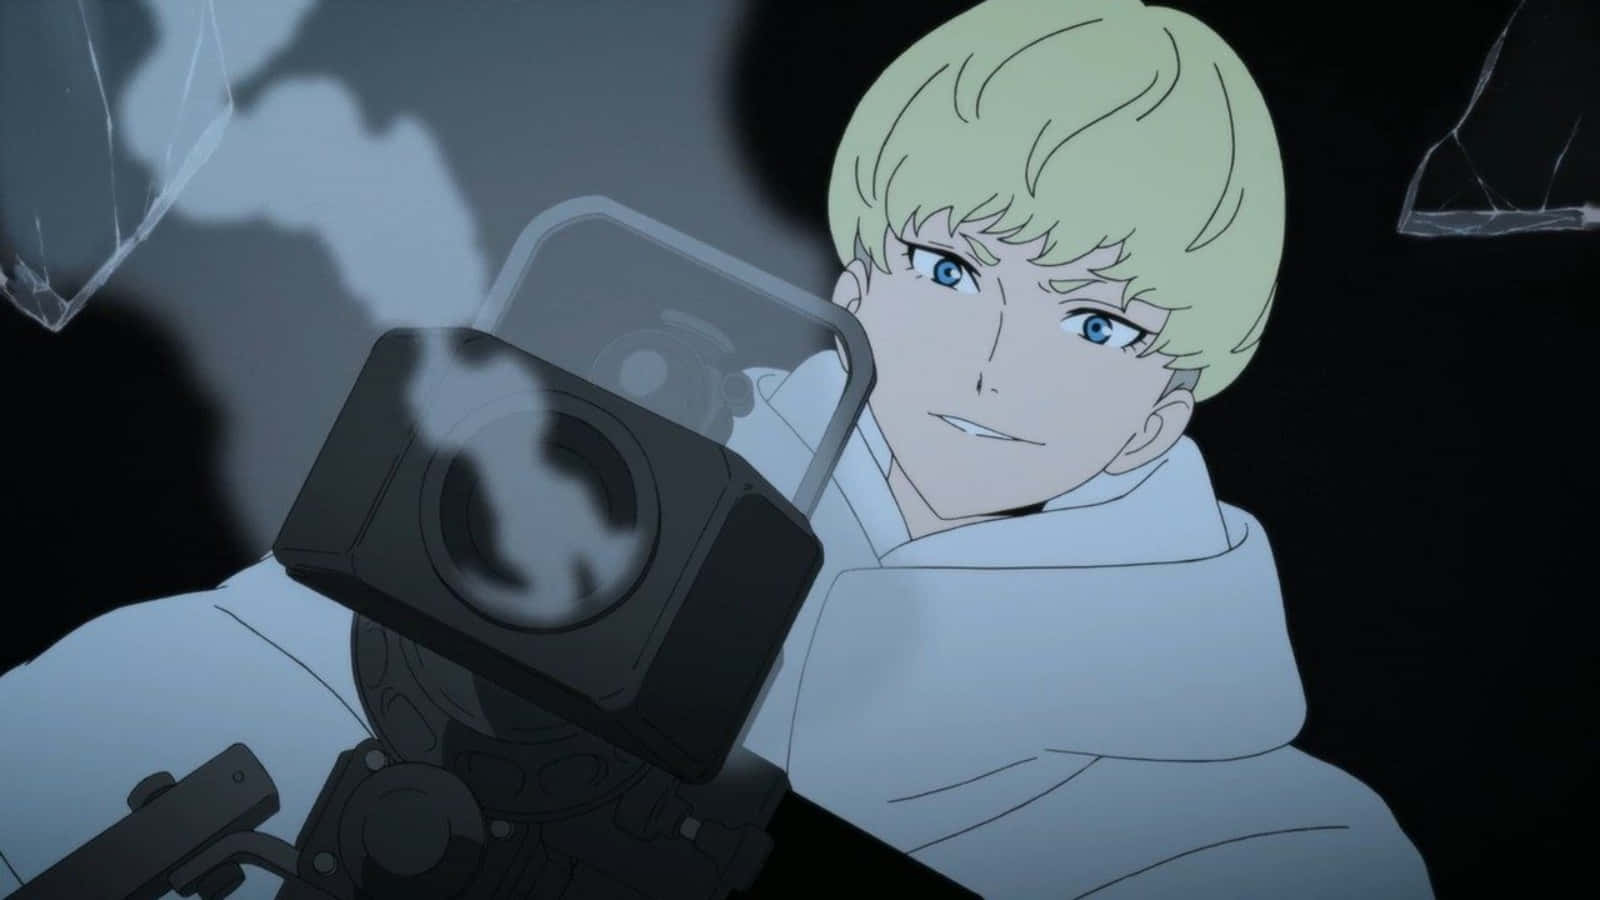 "Take on the world with strength, with Devilman Crybaby"